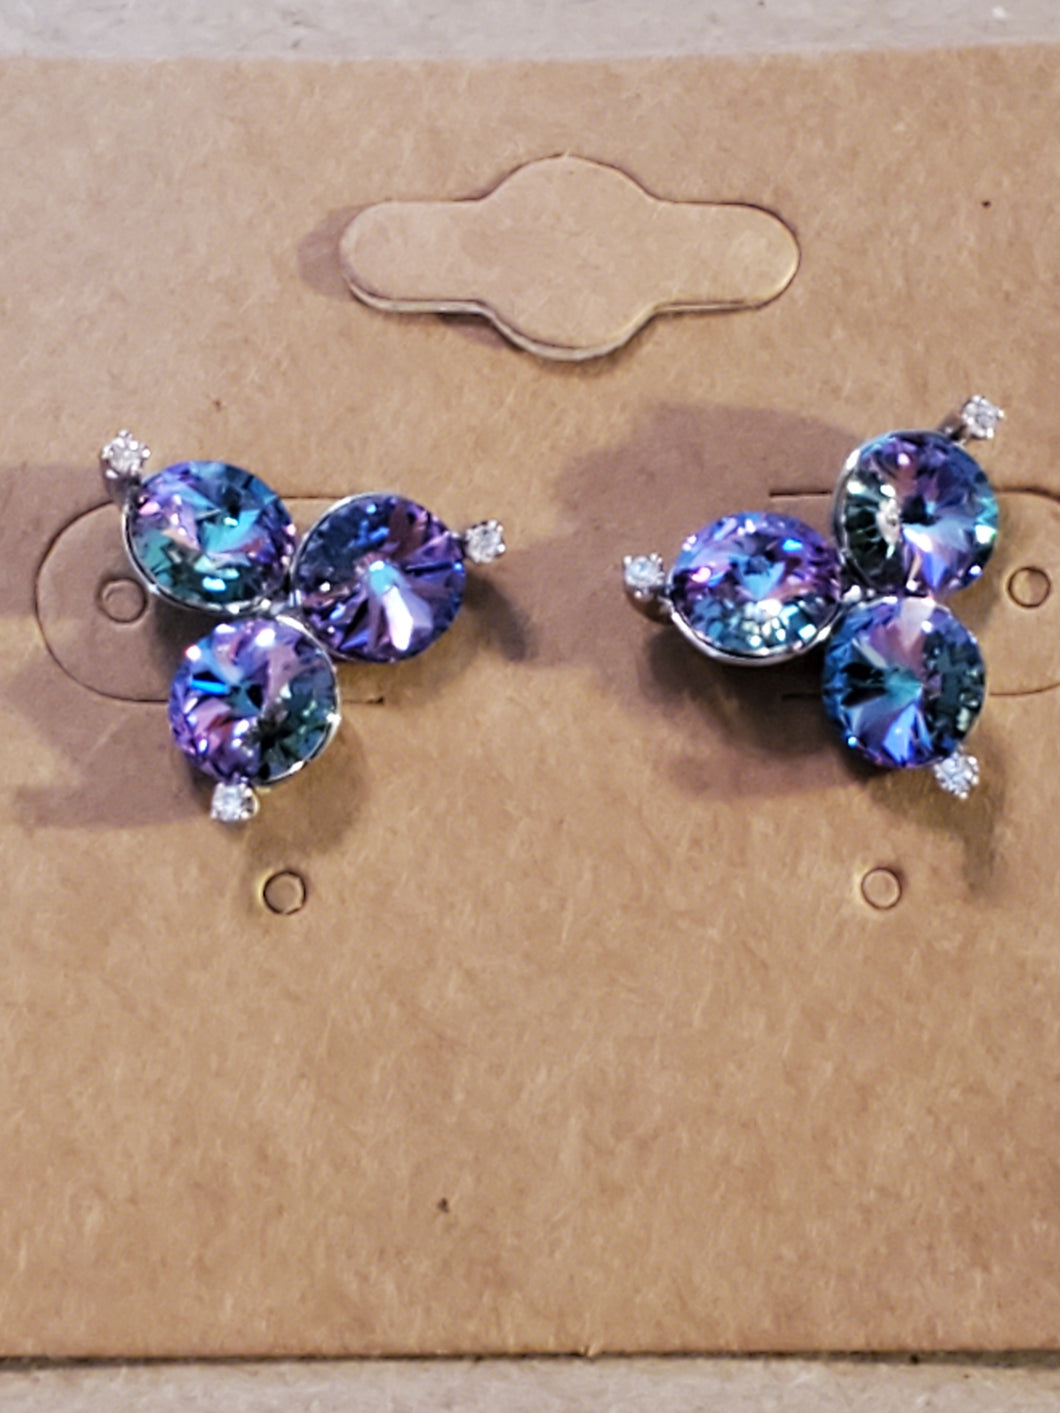 Rhinestone Cluster Earrings - Unique Inspirations by Tracy and Anna